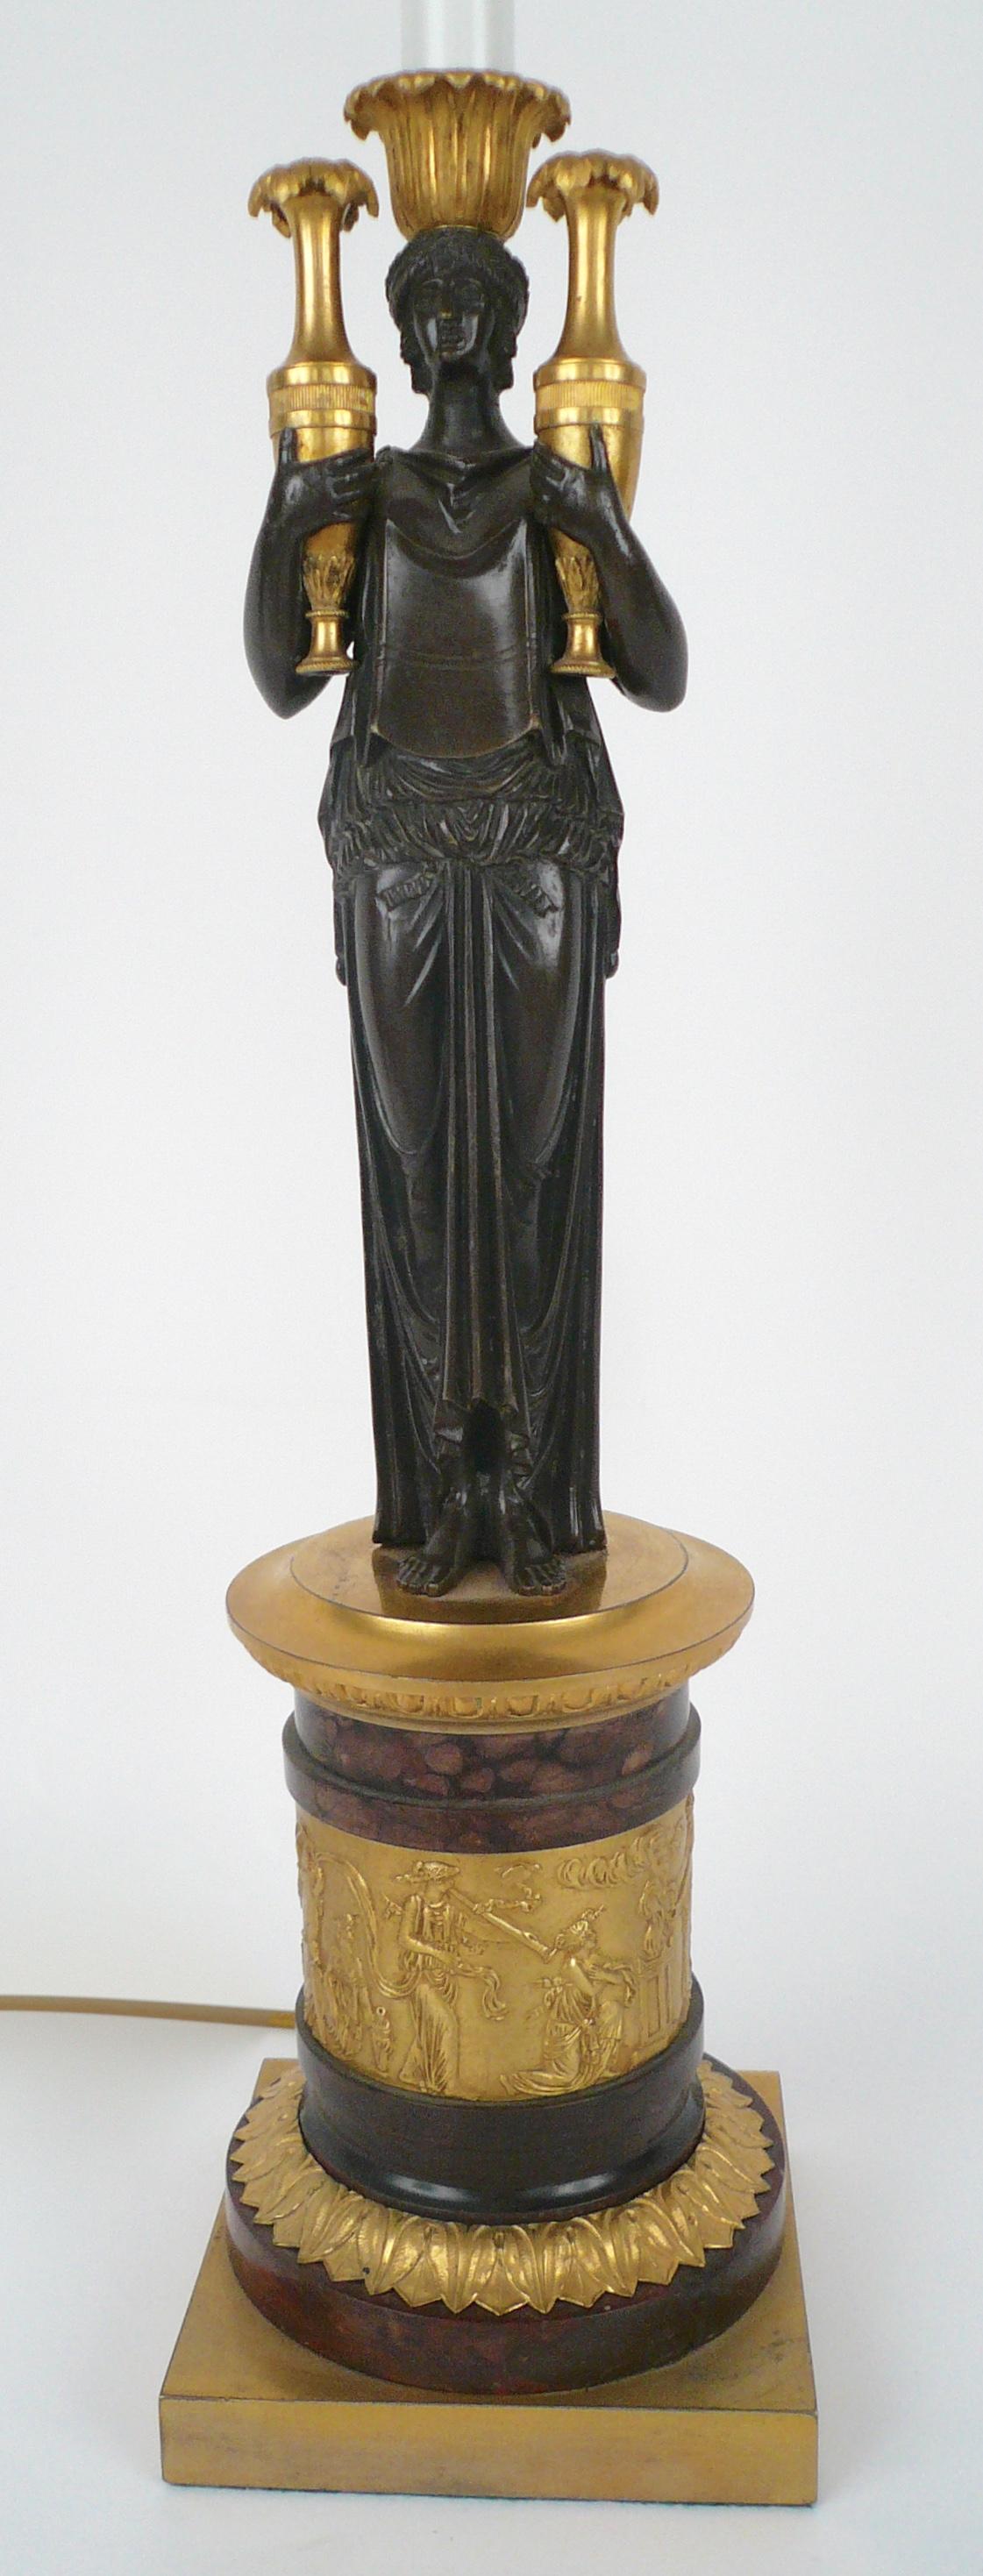 This fine quality lamp base features a gilt classical frieze, and a patinated bronze figure of a classical maiden.